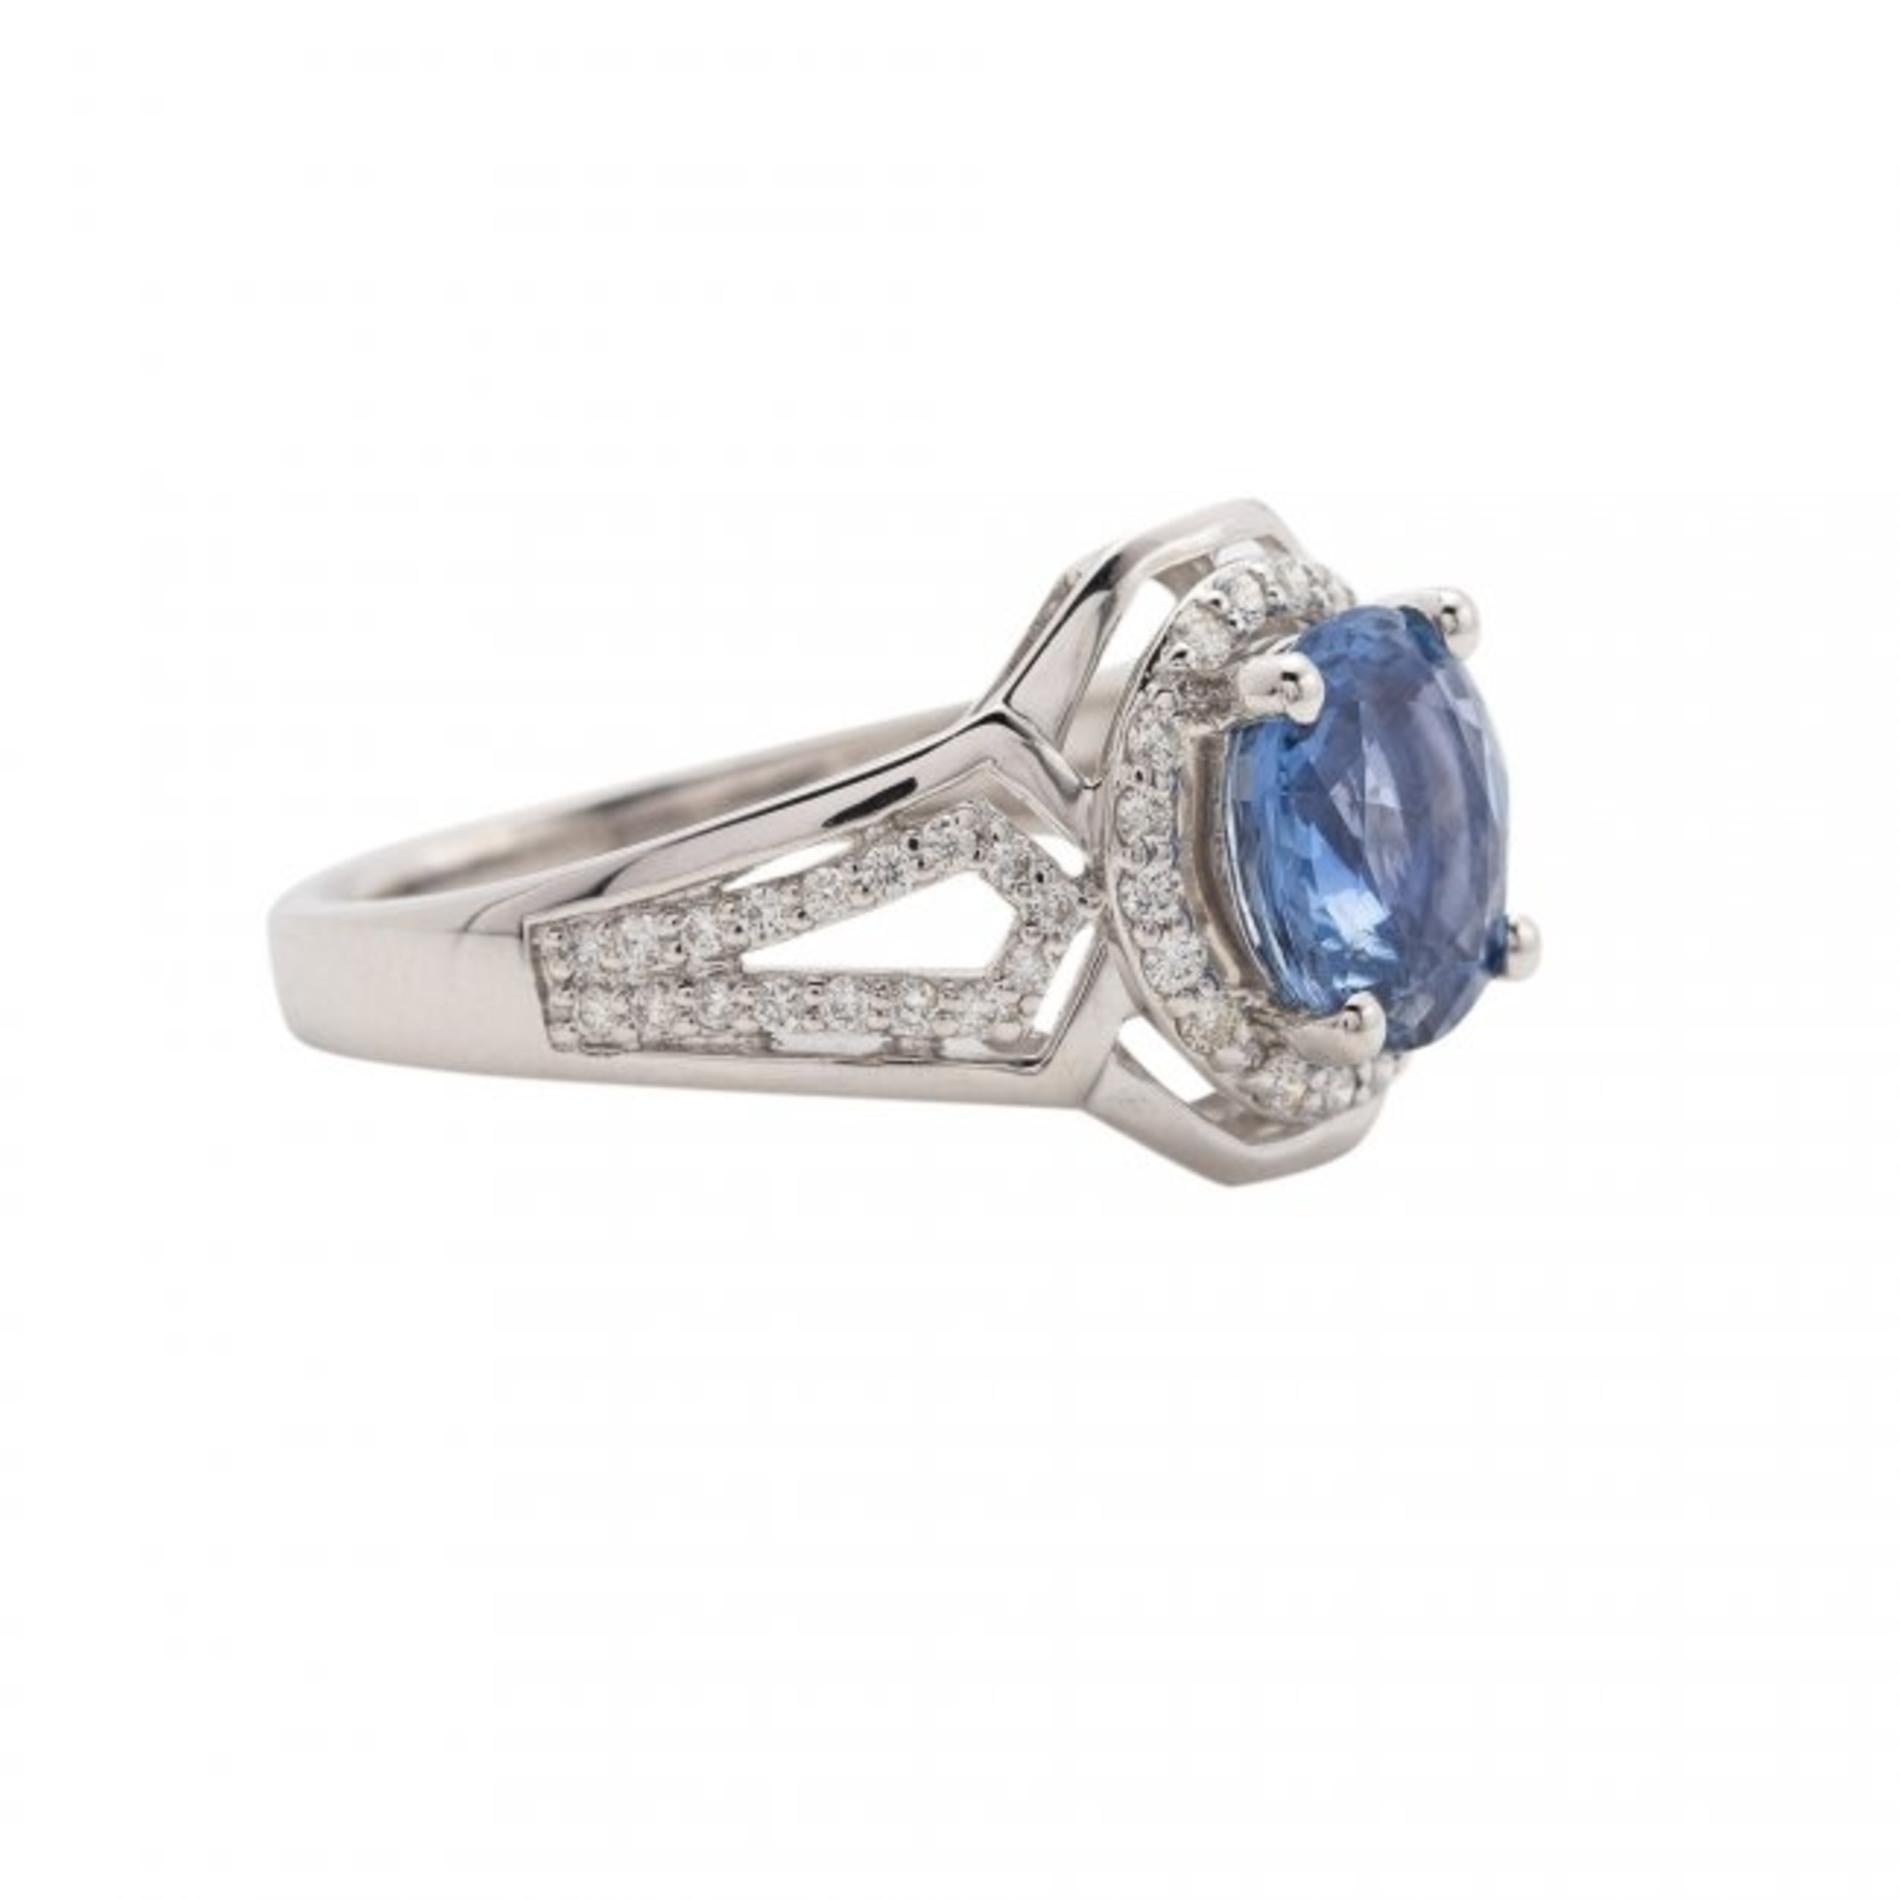 Sapphire and Diamond Ring 
The cushion-shaped sapphire weighing 2.37 carats, set within a ballerina mounting comprised of round diamonds, diamonds weighing approximately .31 cts. 
mounted in platinum
7.40 grams (gross) , size 7 3/4 

Authentication: